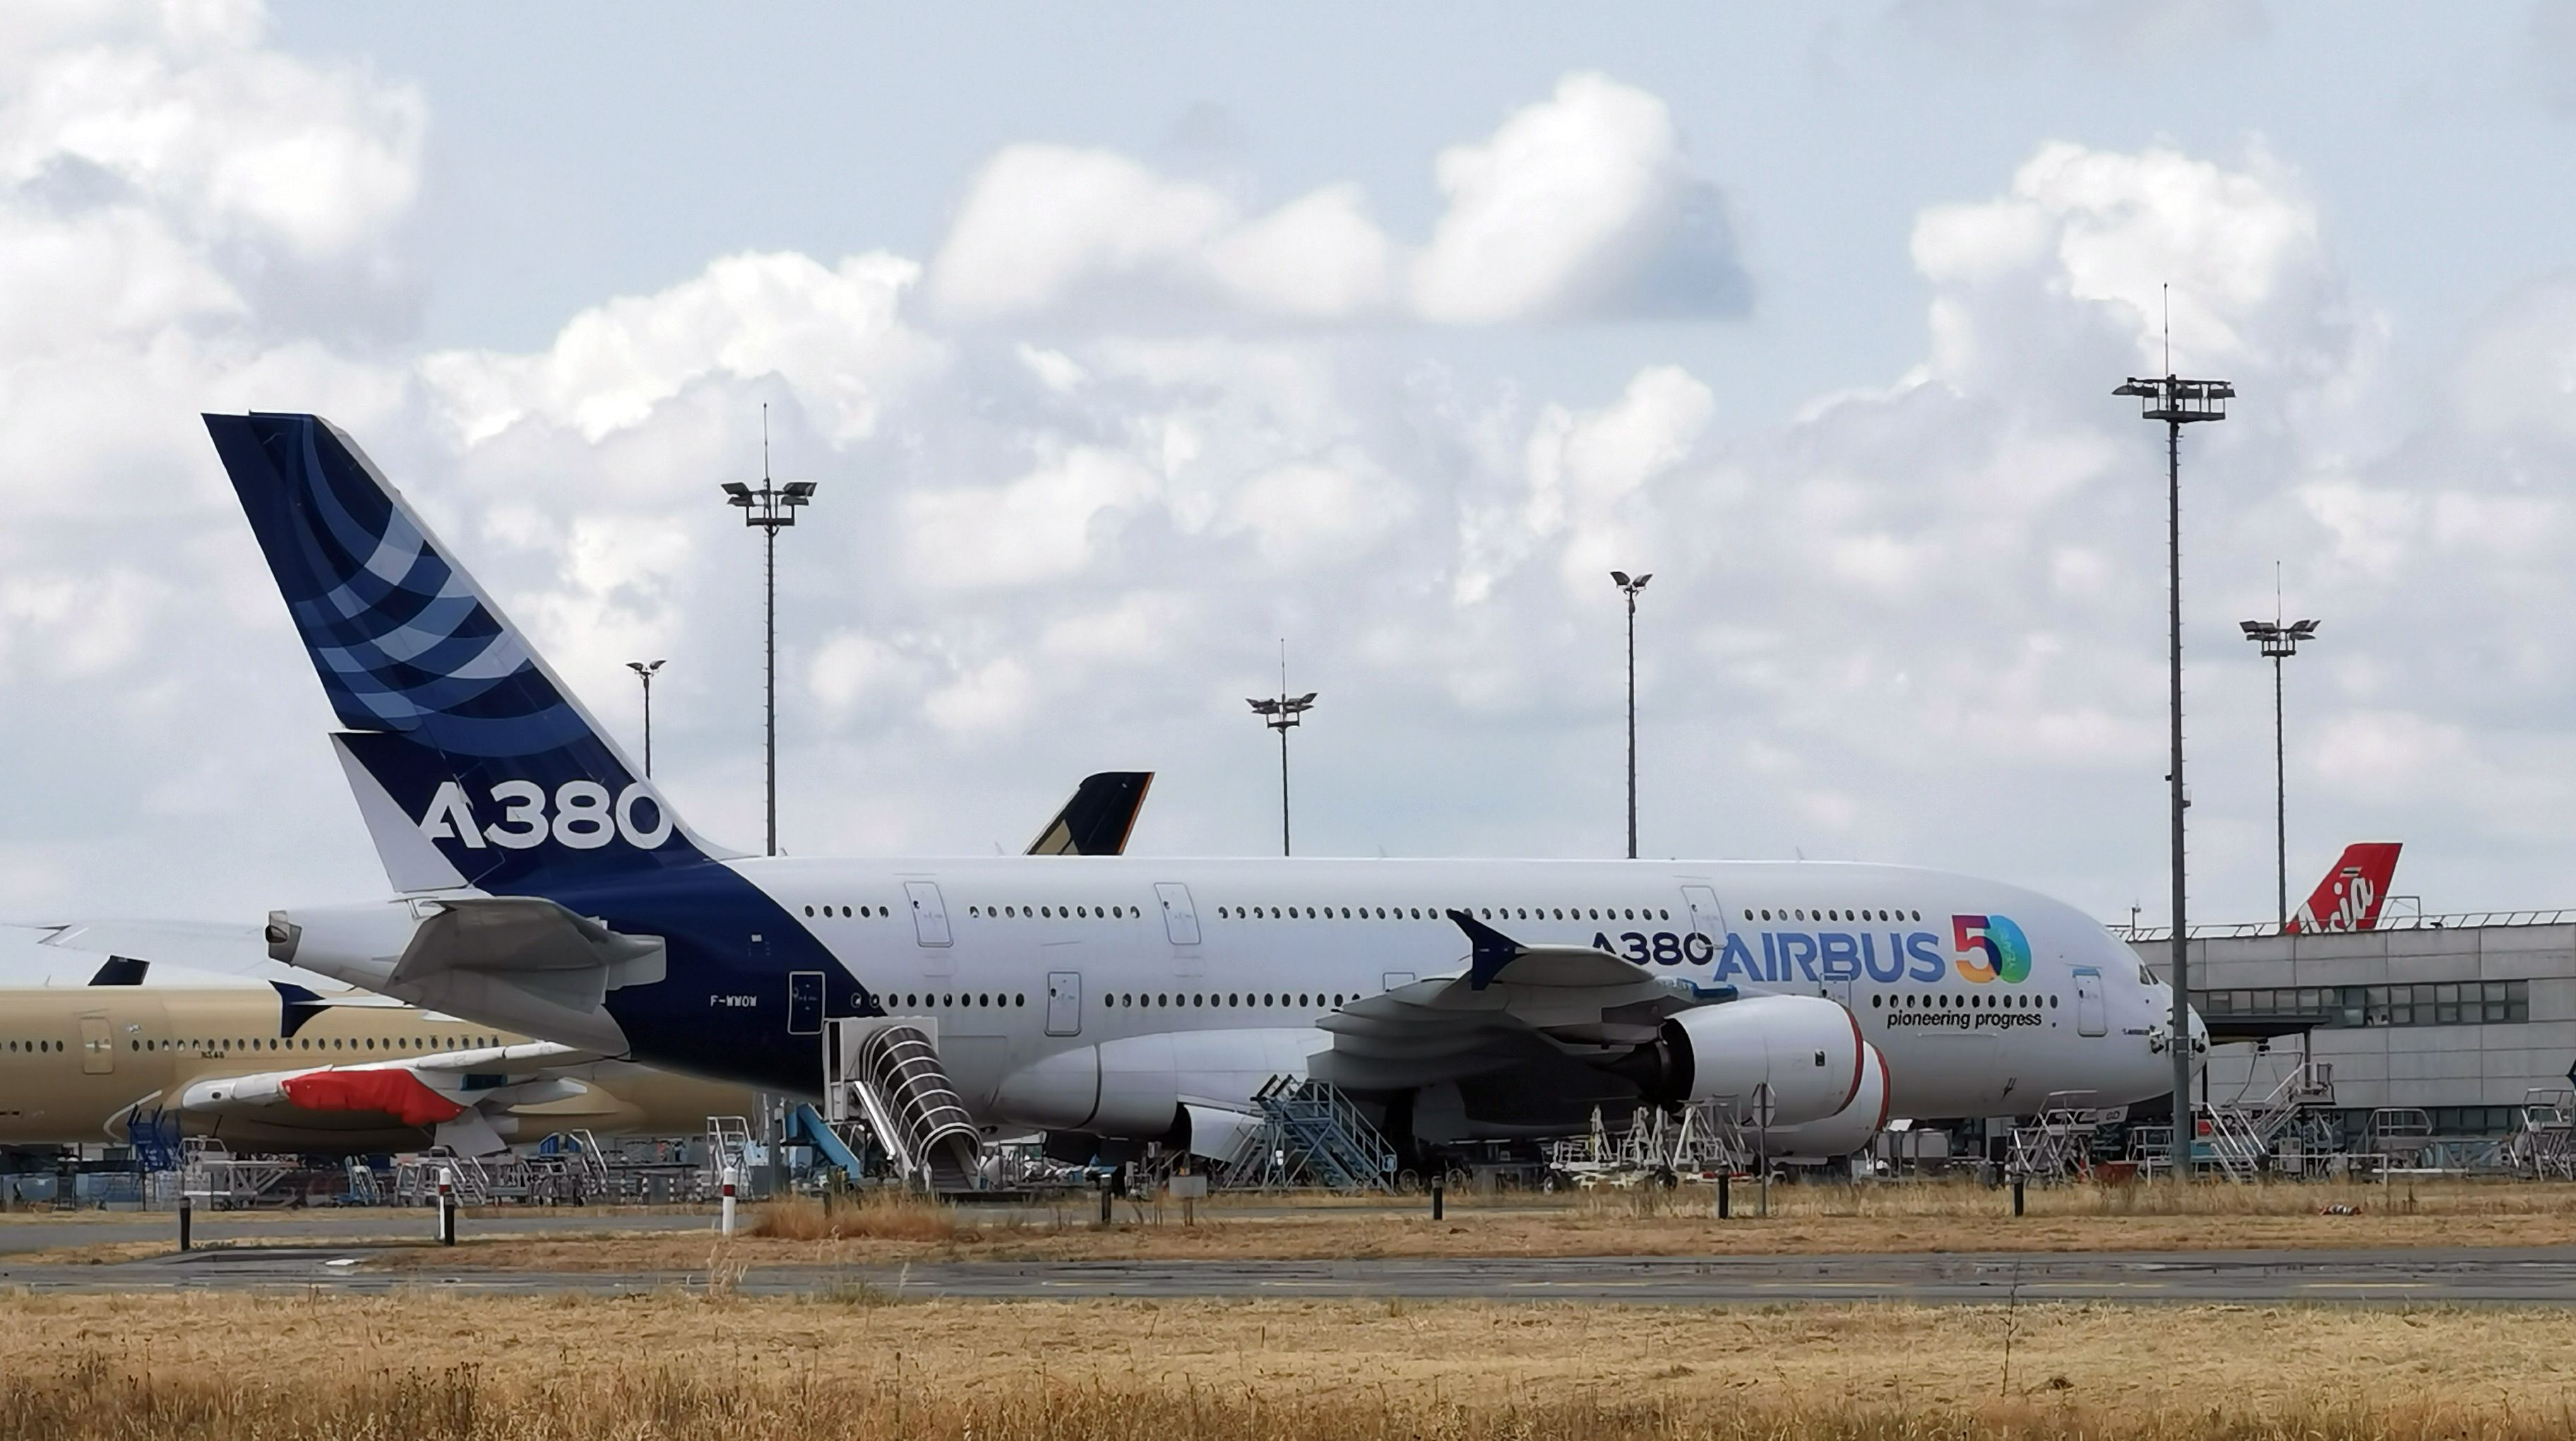 An Airbus A380 in house livery parked at an airport.